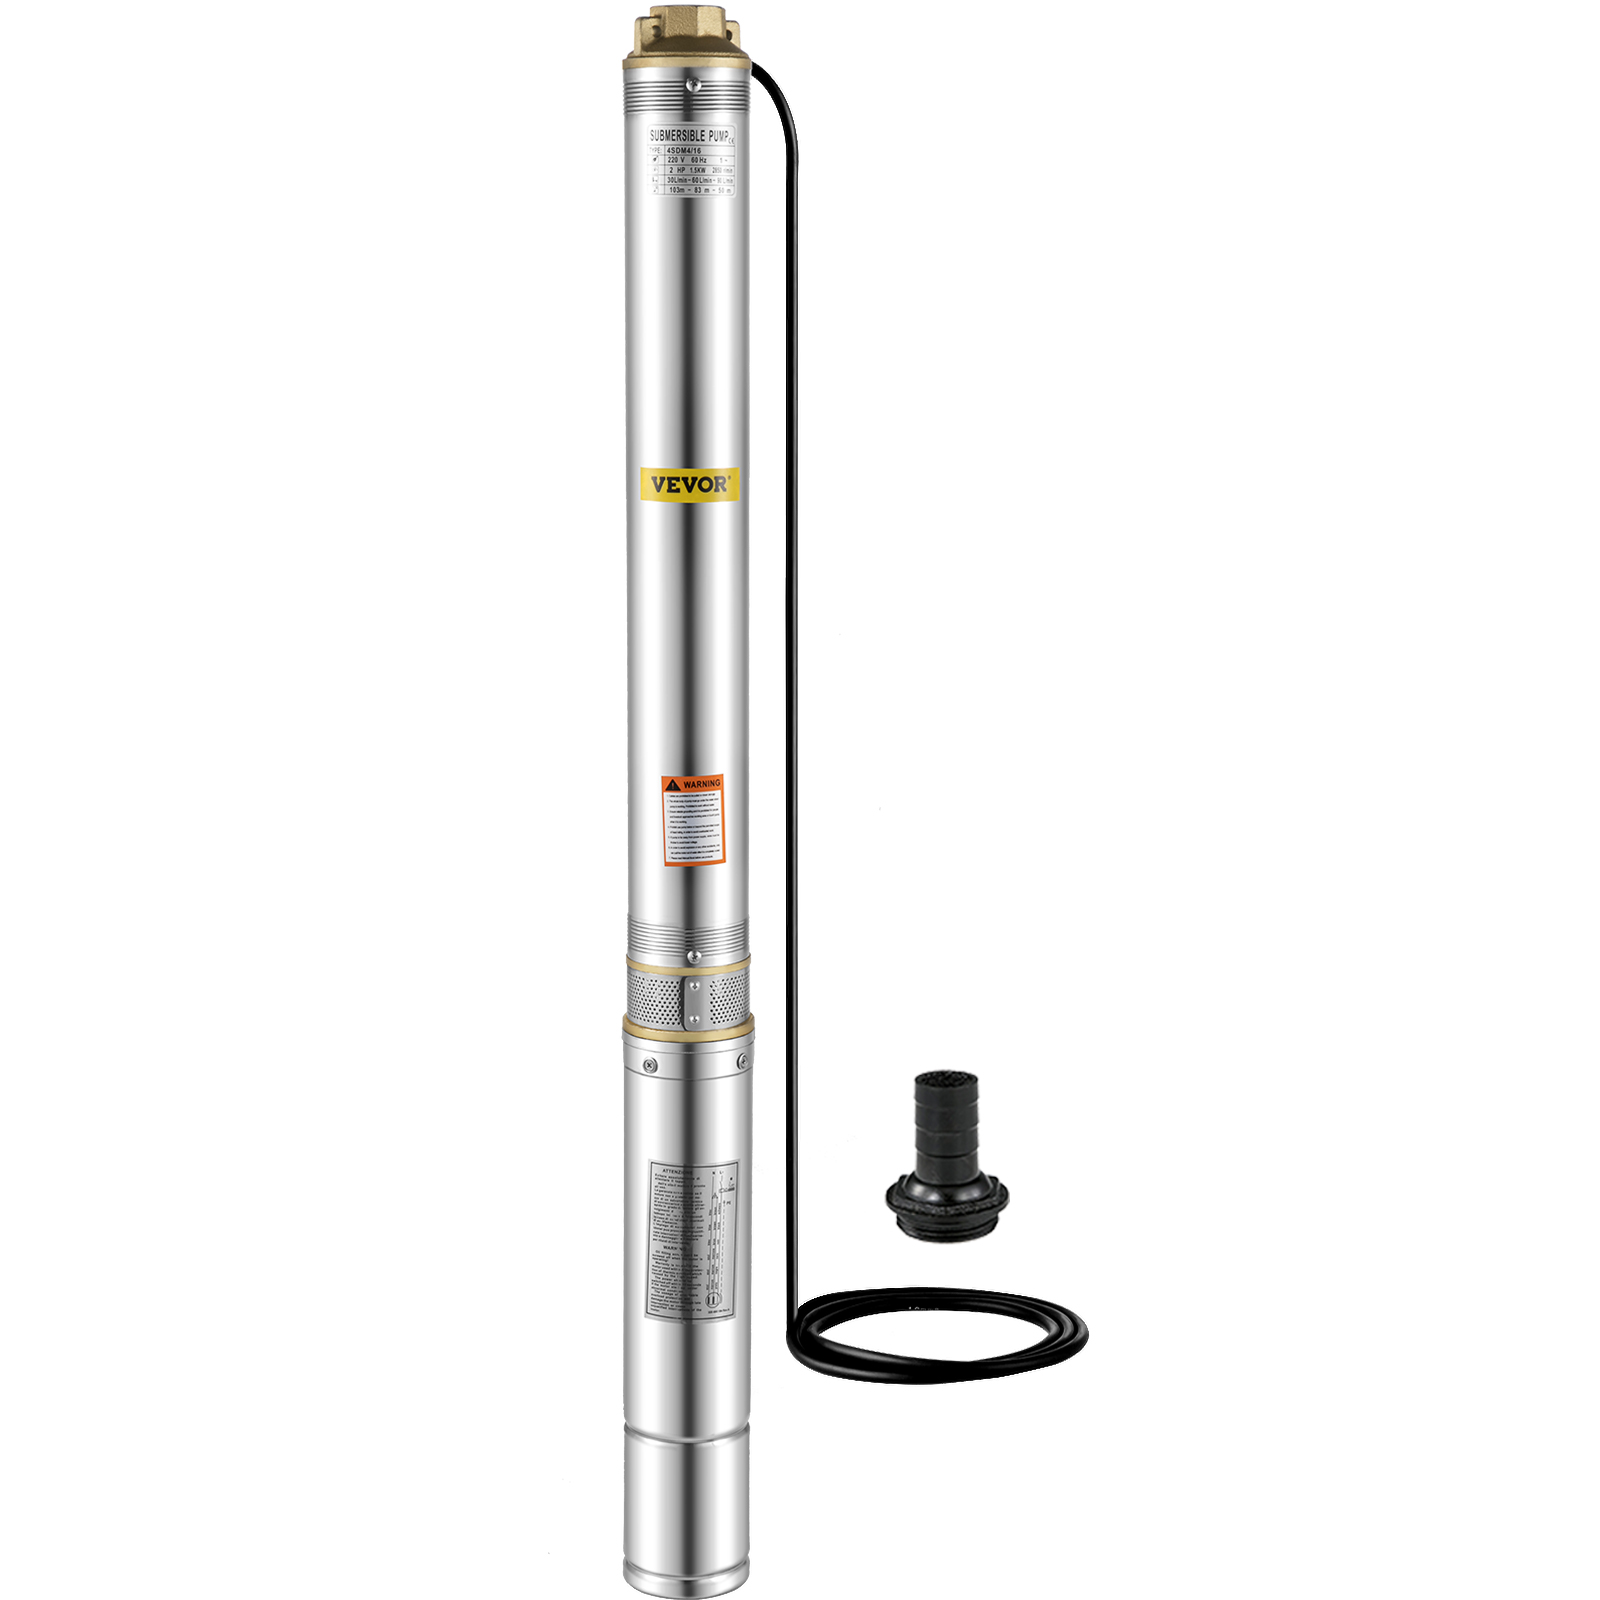 Vevor 1.5hp 4" Deep Well Pump 24gpm Submersible Well Pump Stainless Steel 220v от Vevor Many GEOs